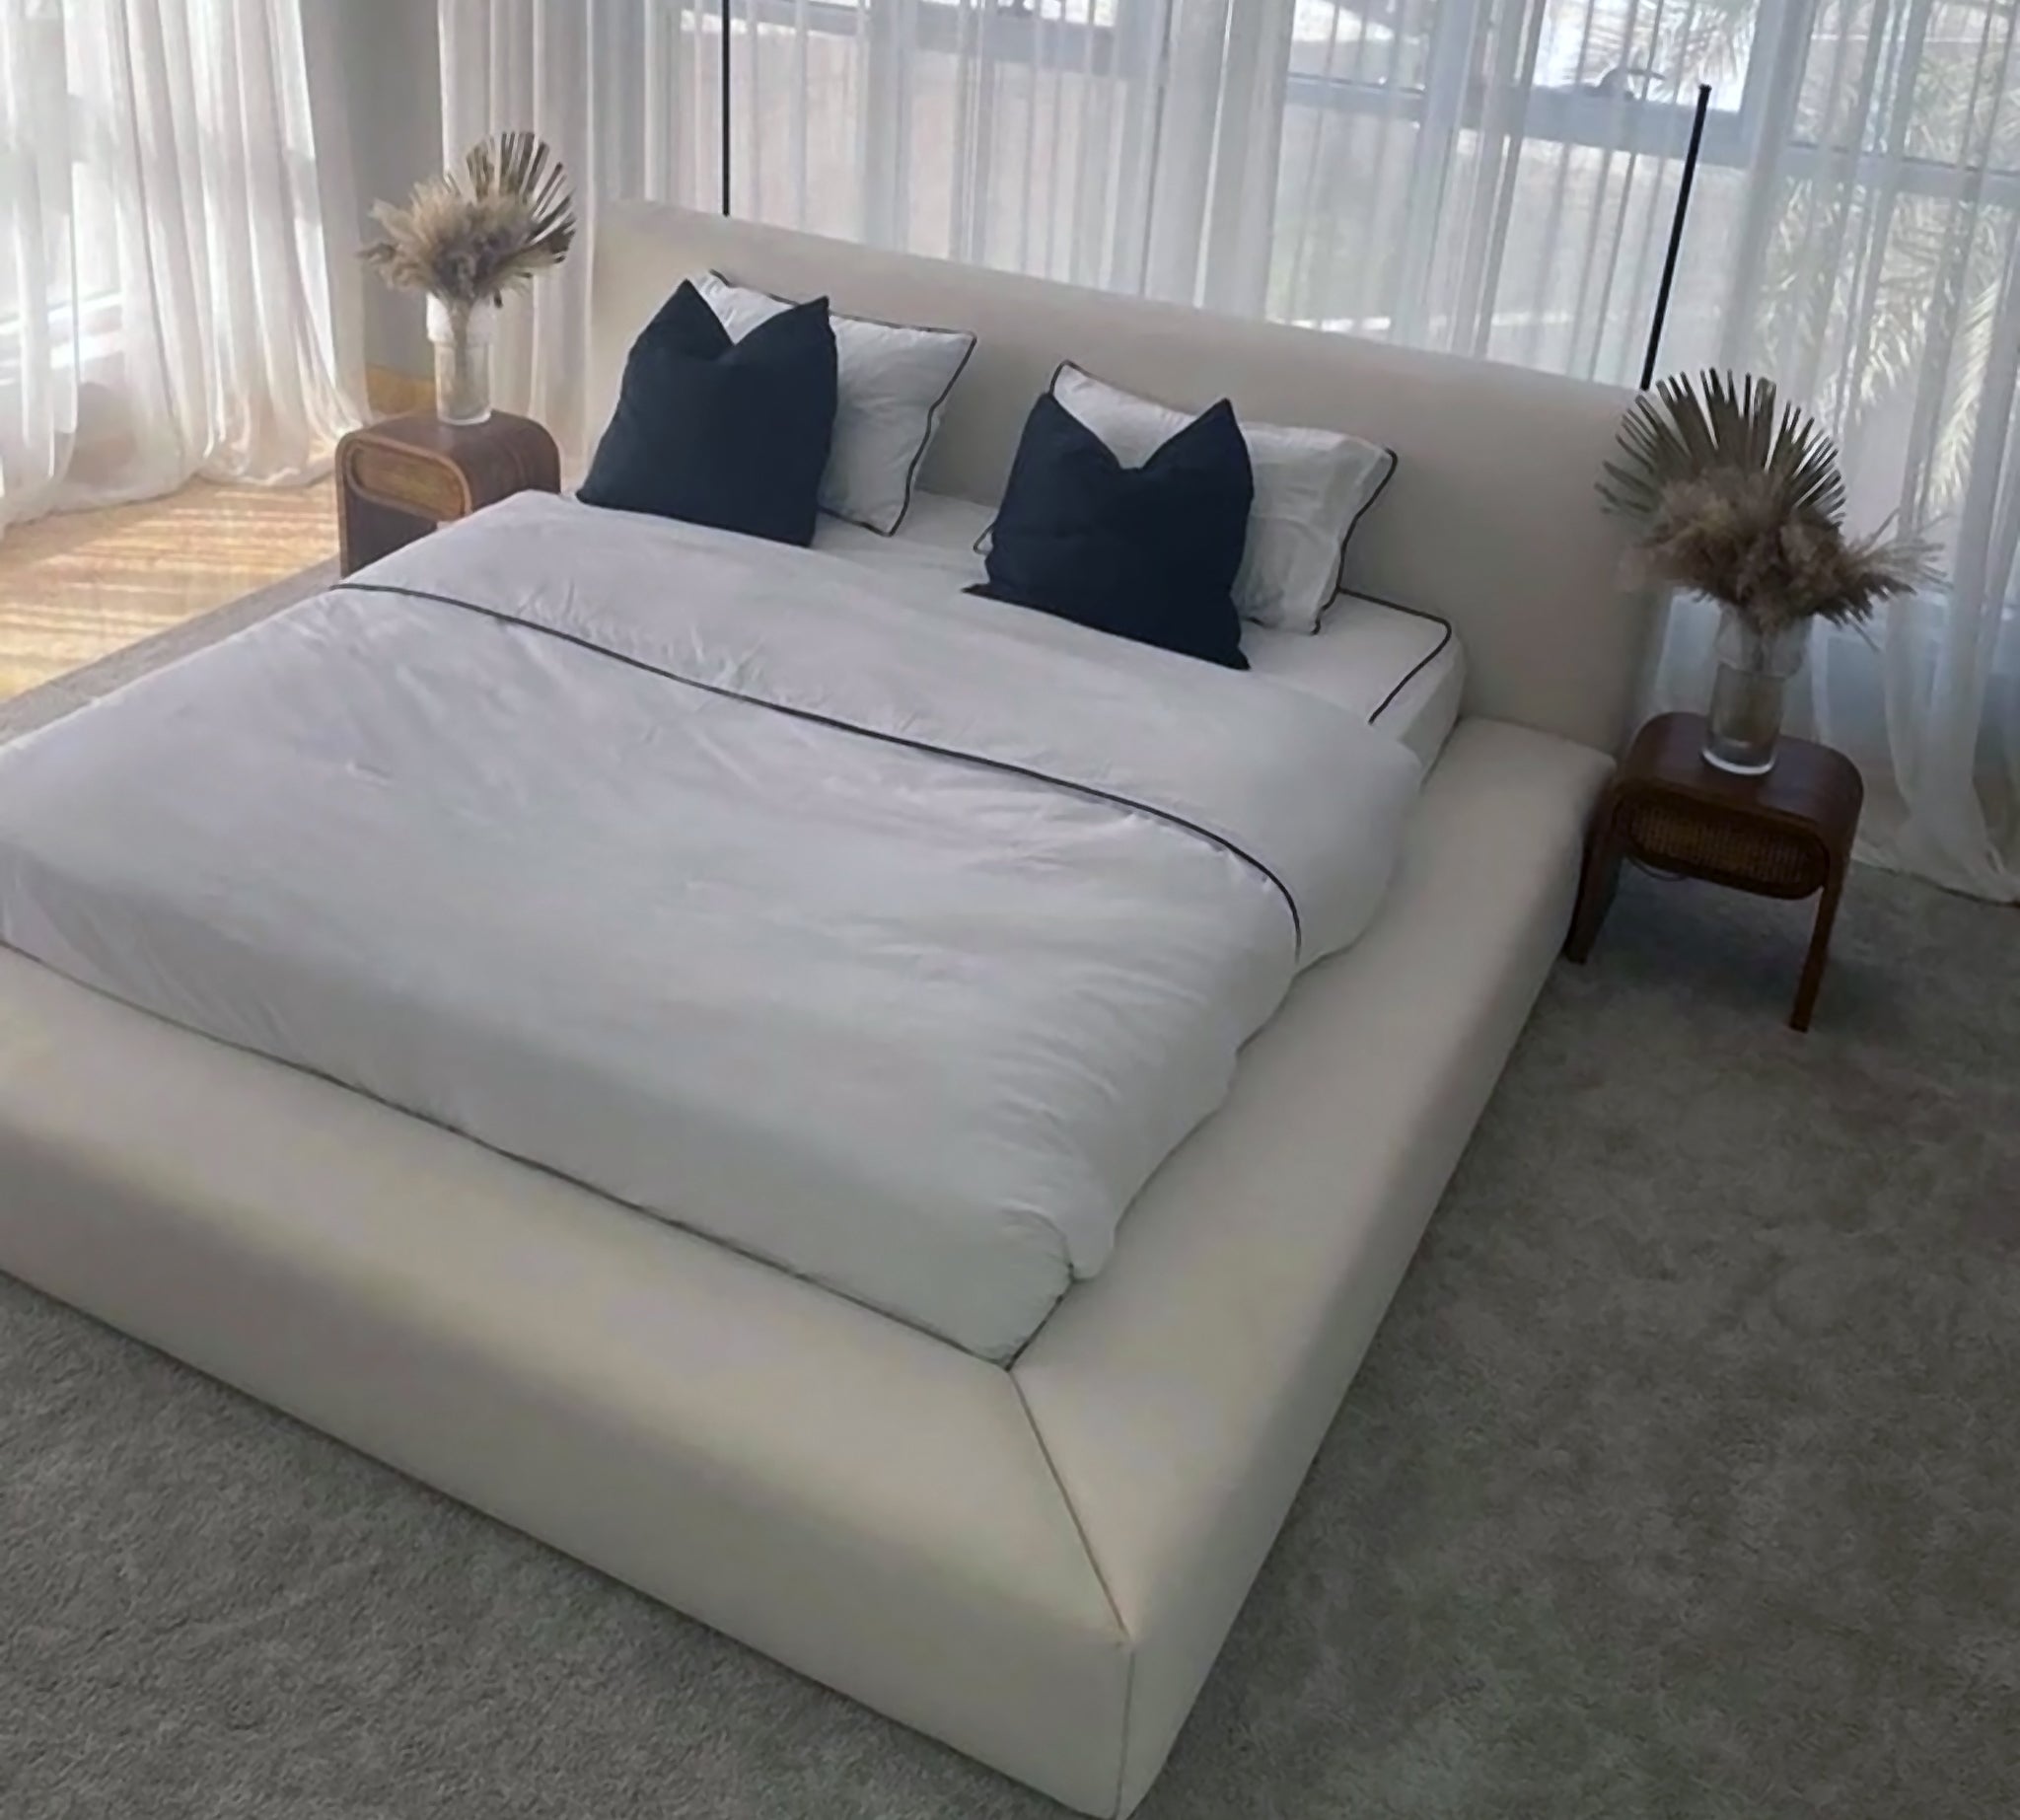 Light and airy bedroom showcasing the Stella bed with a tufted headboard. Easy care platform bed in a calming retreat.